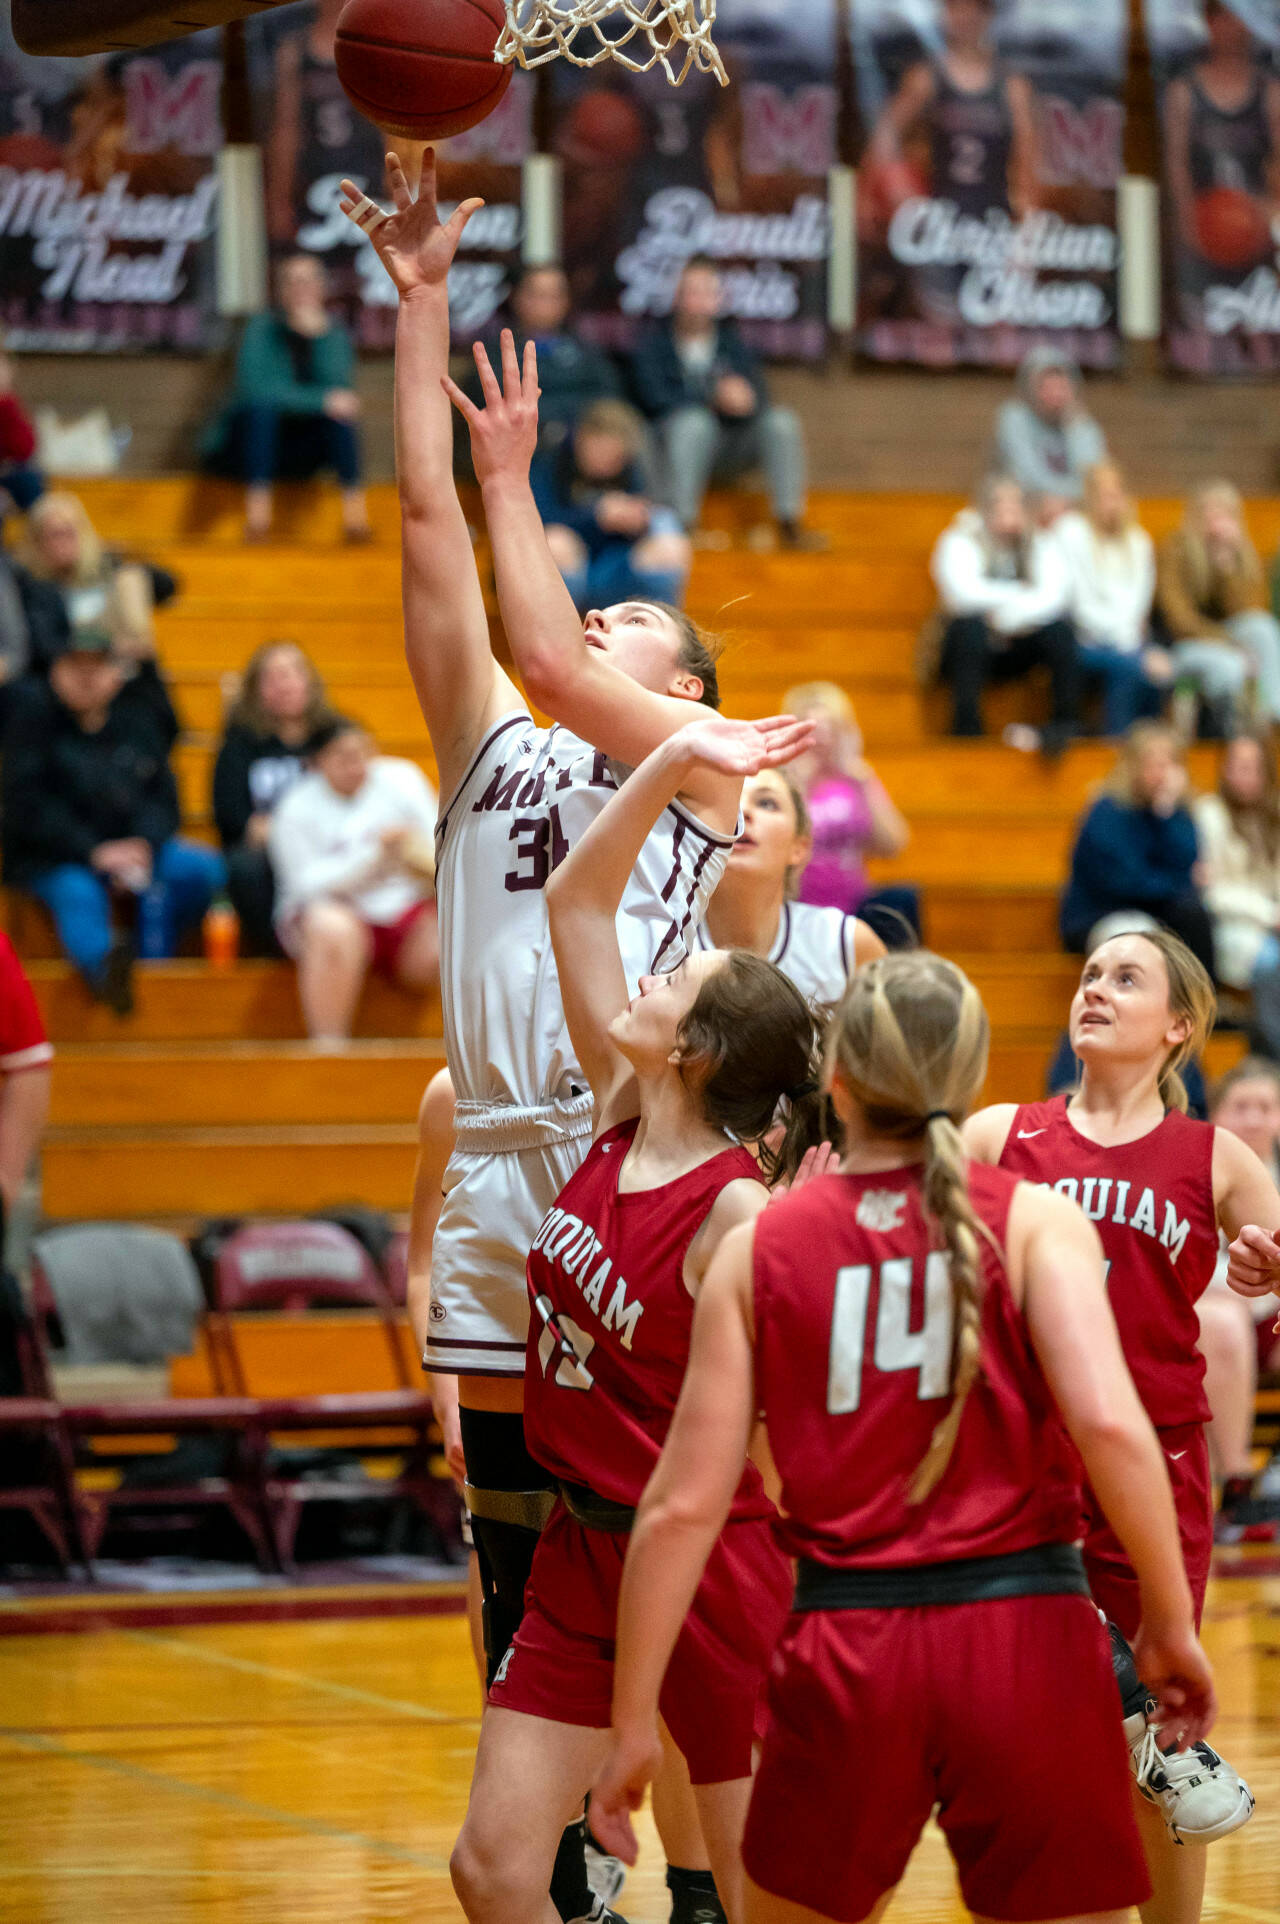 PHOTO BY FOREST WORGUM Montesano senior McKynnlie Dalan, left, puts up a shot while defended by Hoquiam’s Katlyn Brodhead during the Bulldogs’ 69-10 win on Tuesday at Montesano High School.